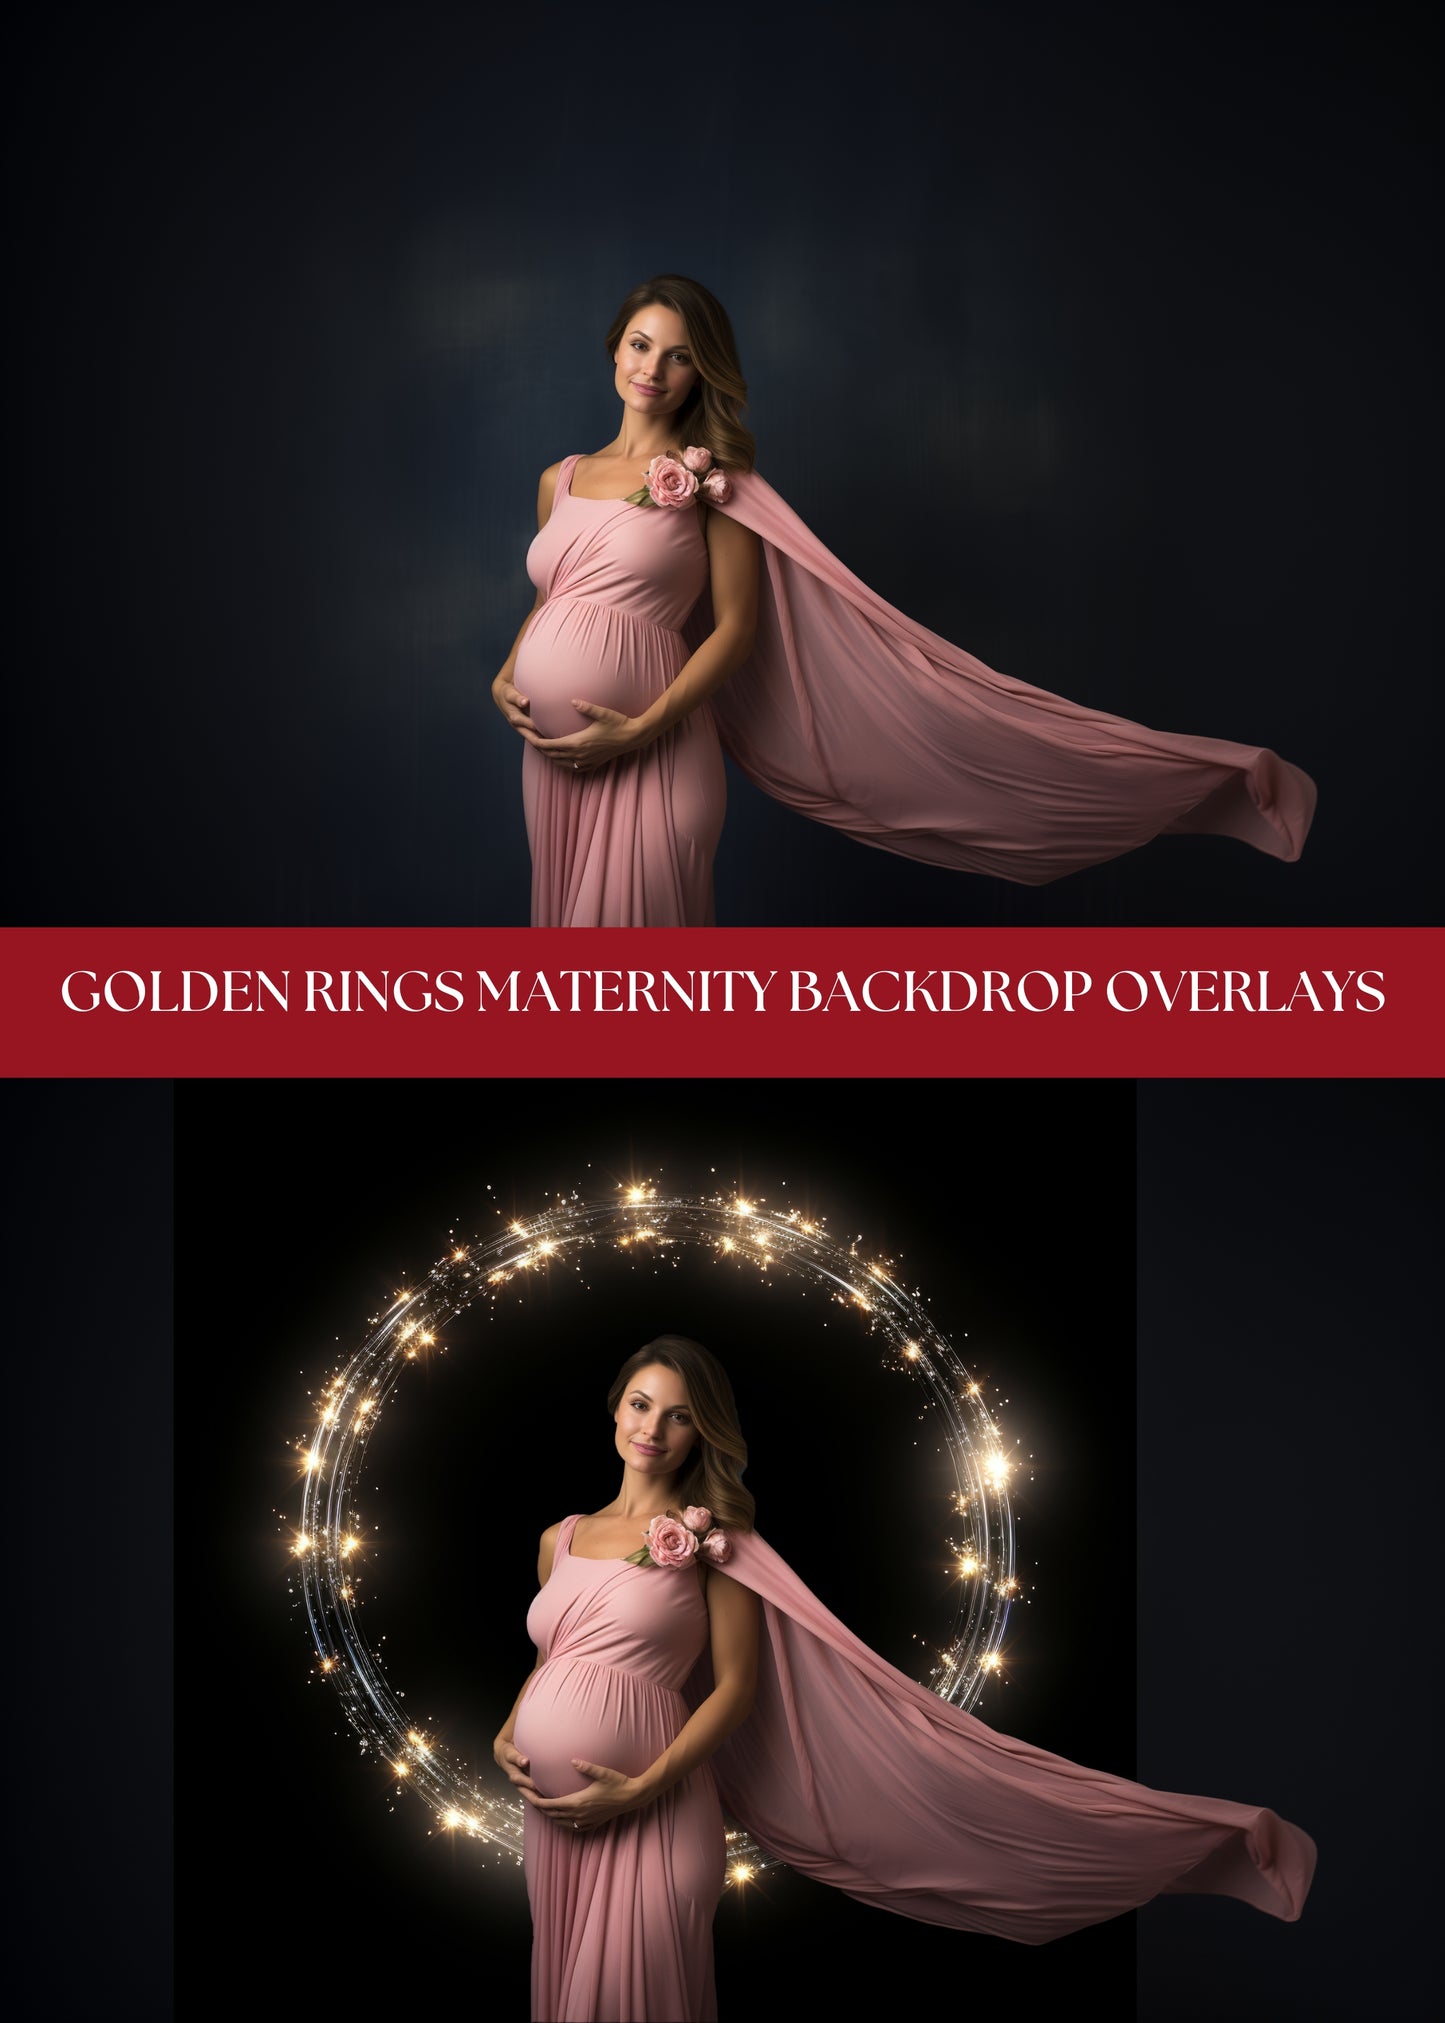 Gold Ring Maternity Backdrop Overlays